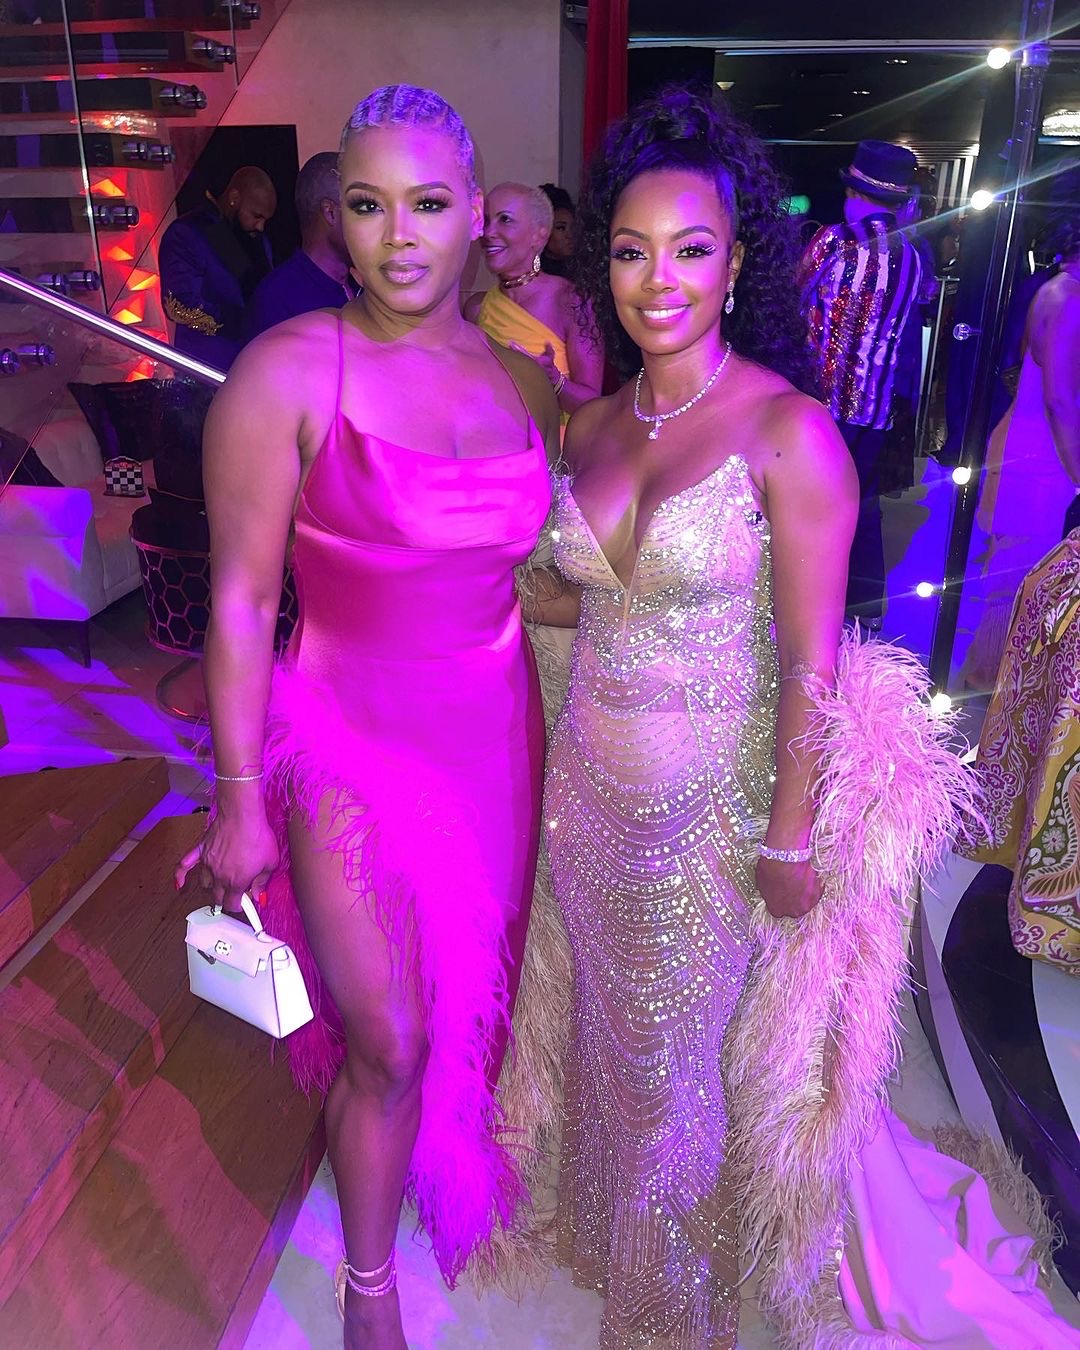 Mielle Organics CEO Monique Rodriguez Celebrated Her 40th Birthday in a Pink Custom Nicole Felicia Gown with Rene Caovilla Heels to her Cirque Du Moleil Theme Party More 8